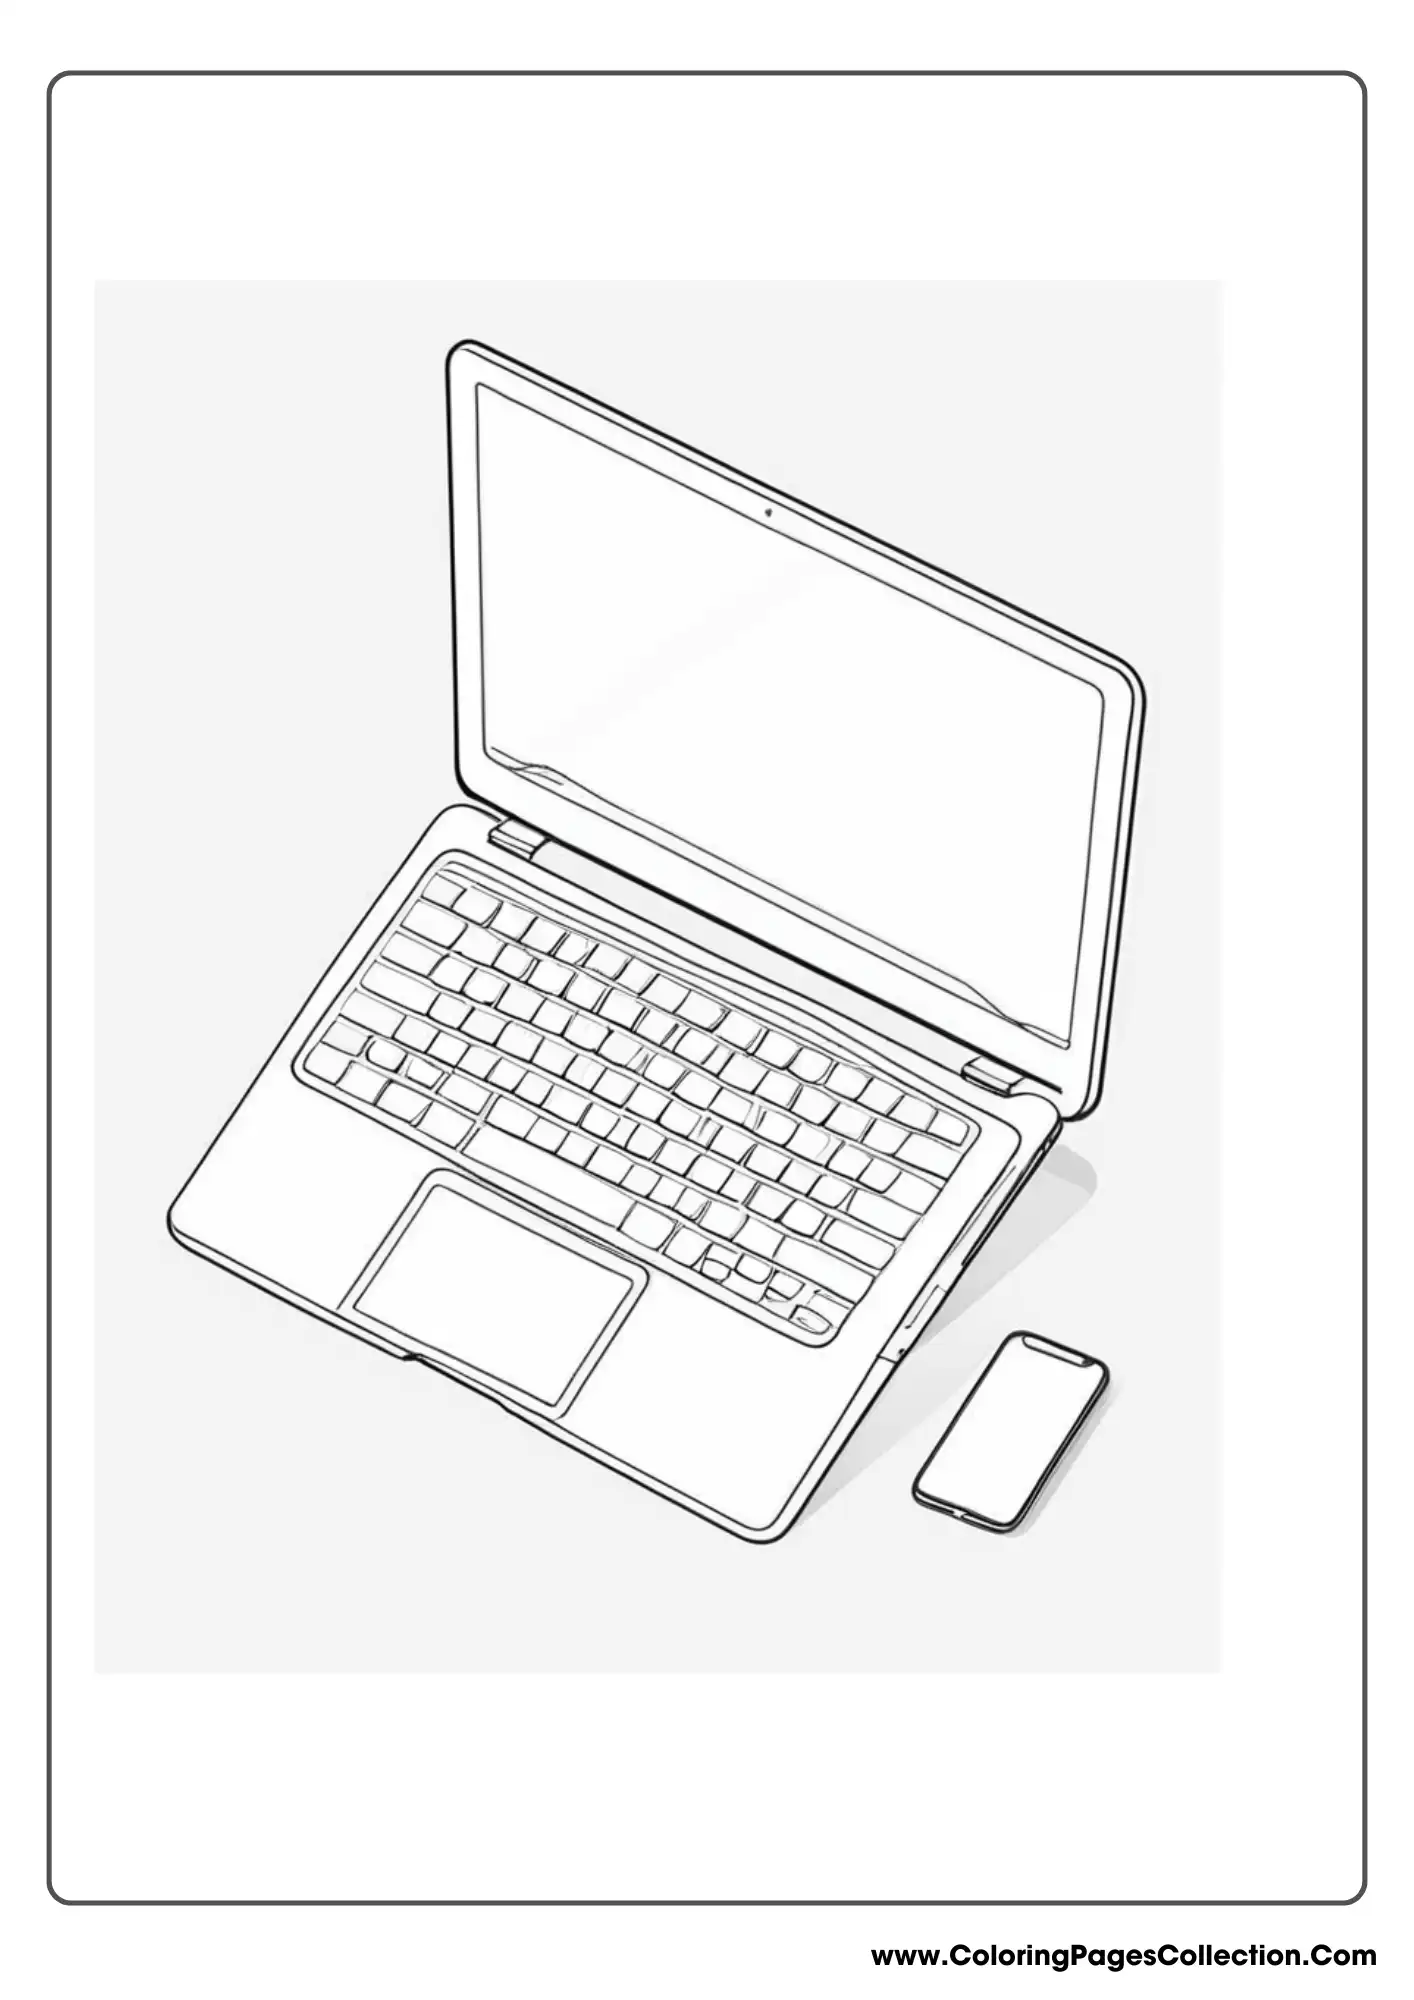 Realistic Laptop And Smartphone, Computer coloring pages